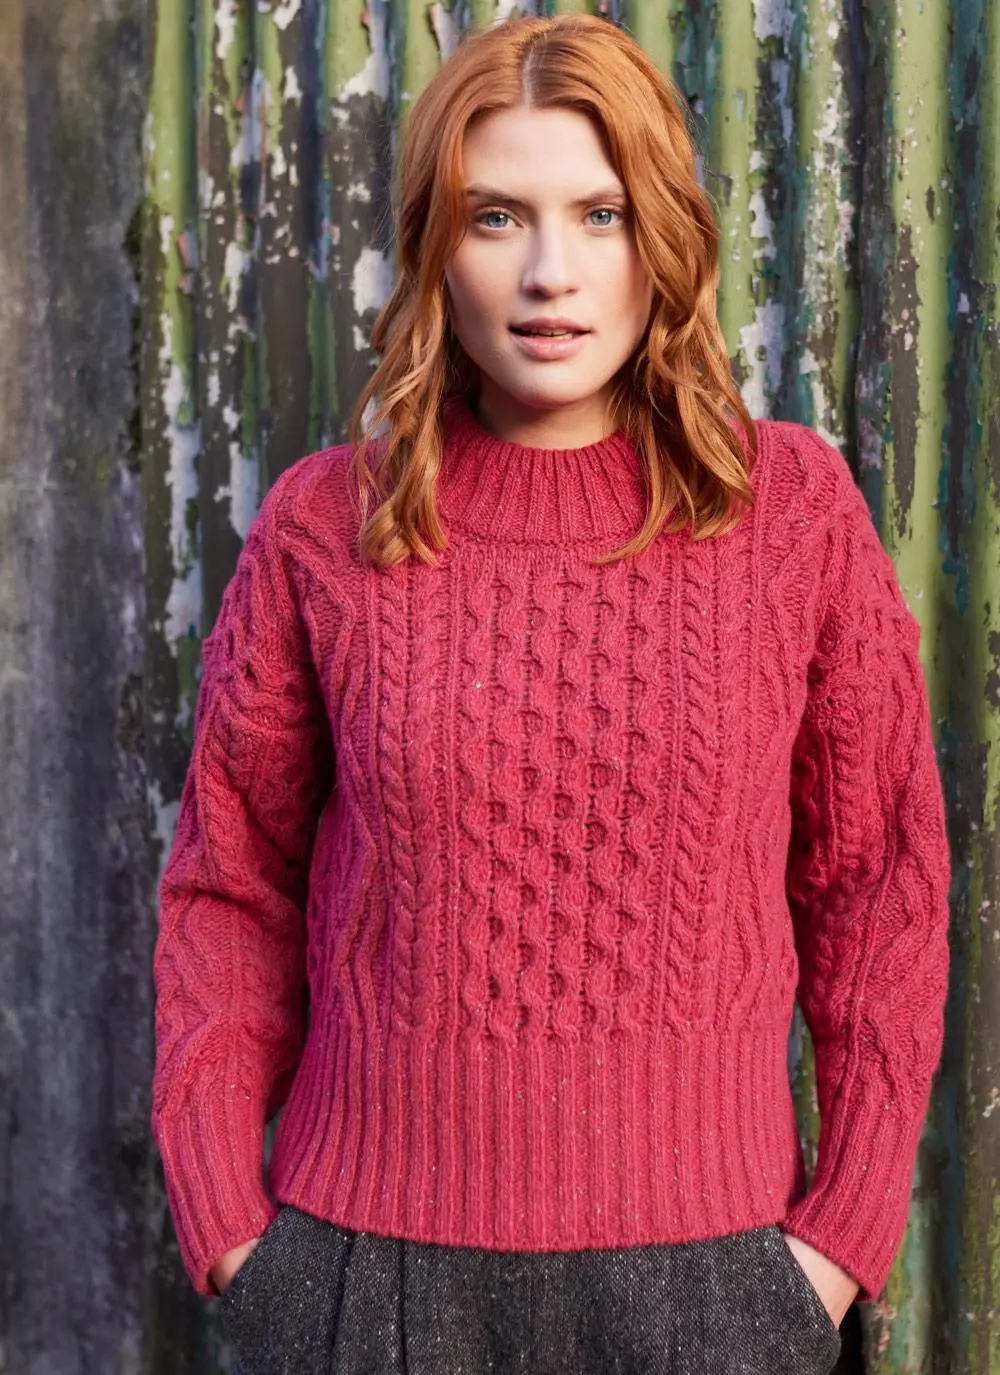 woman with red hair standing against fence wearing berry colored knit sweater